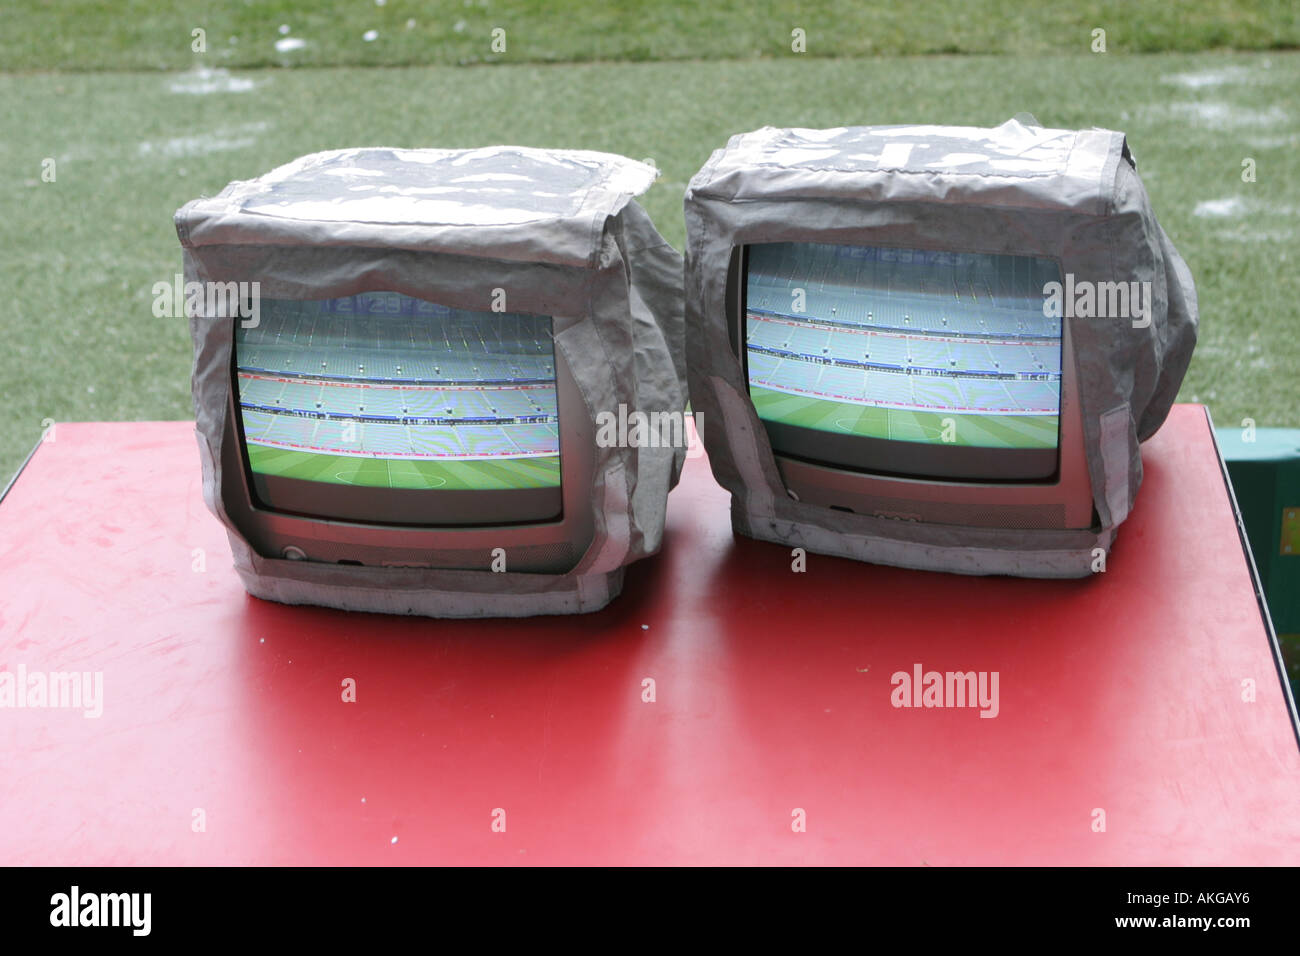 broadcasting equipment in a stadion Stock Photo - Alamy